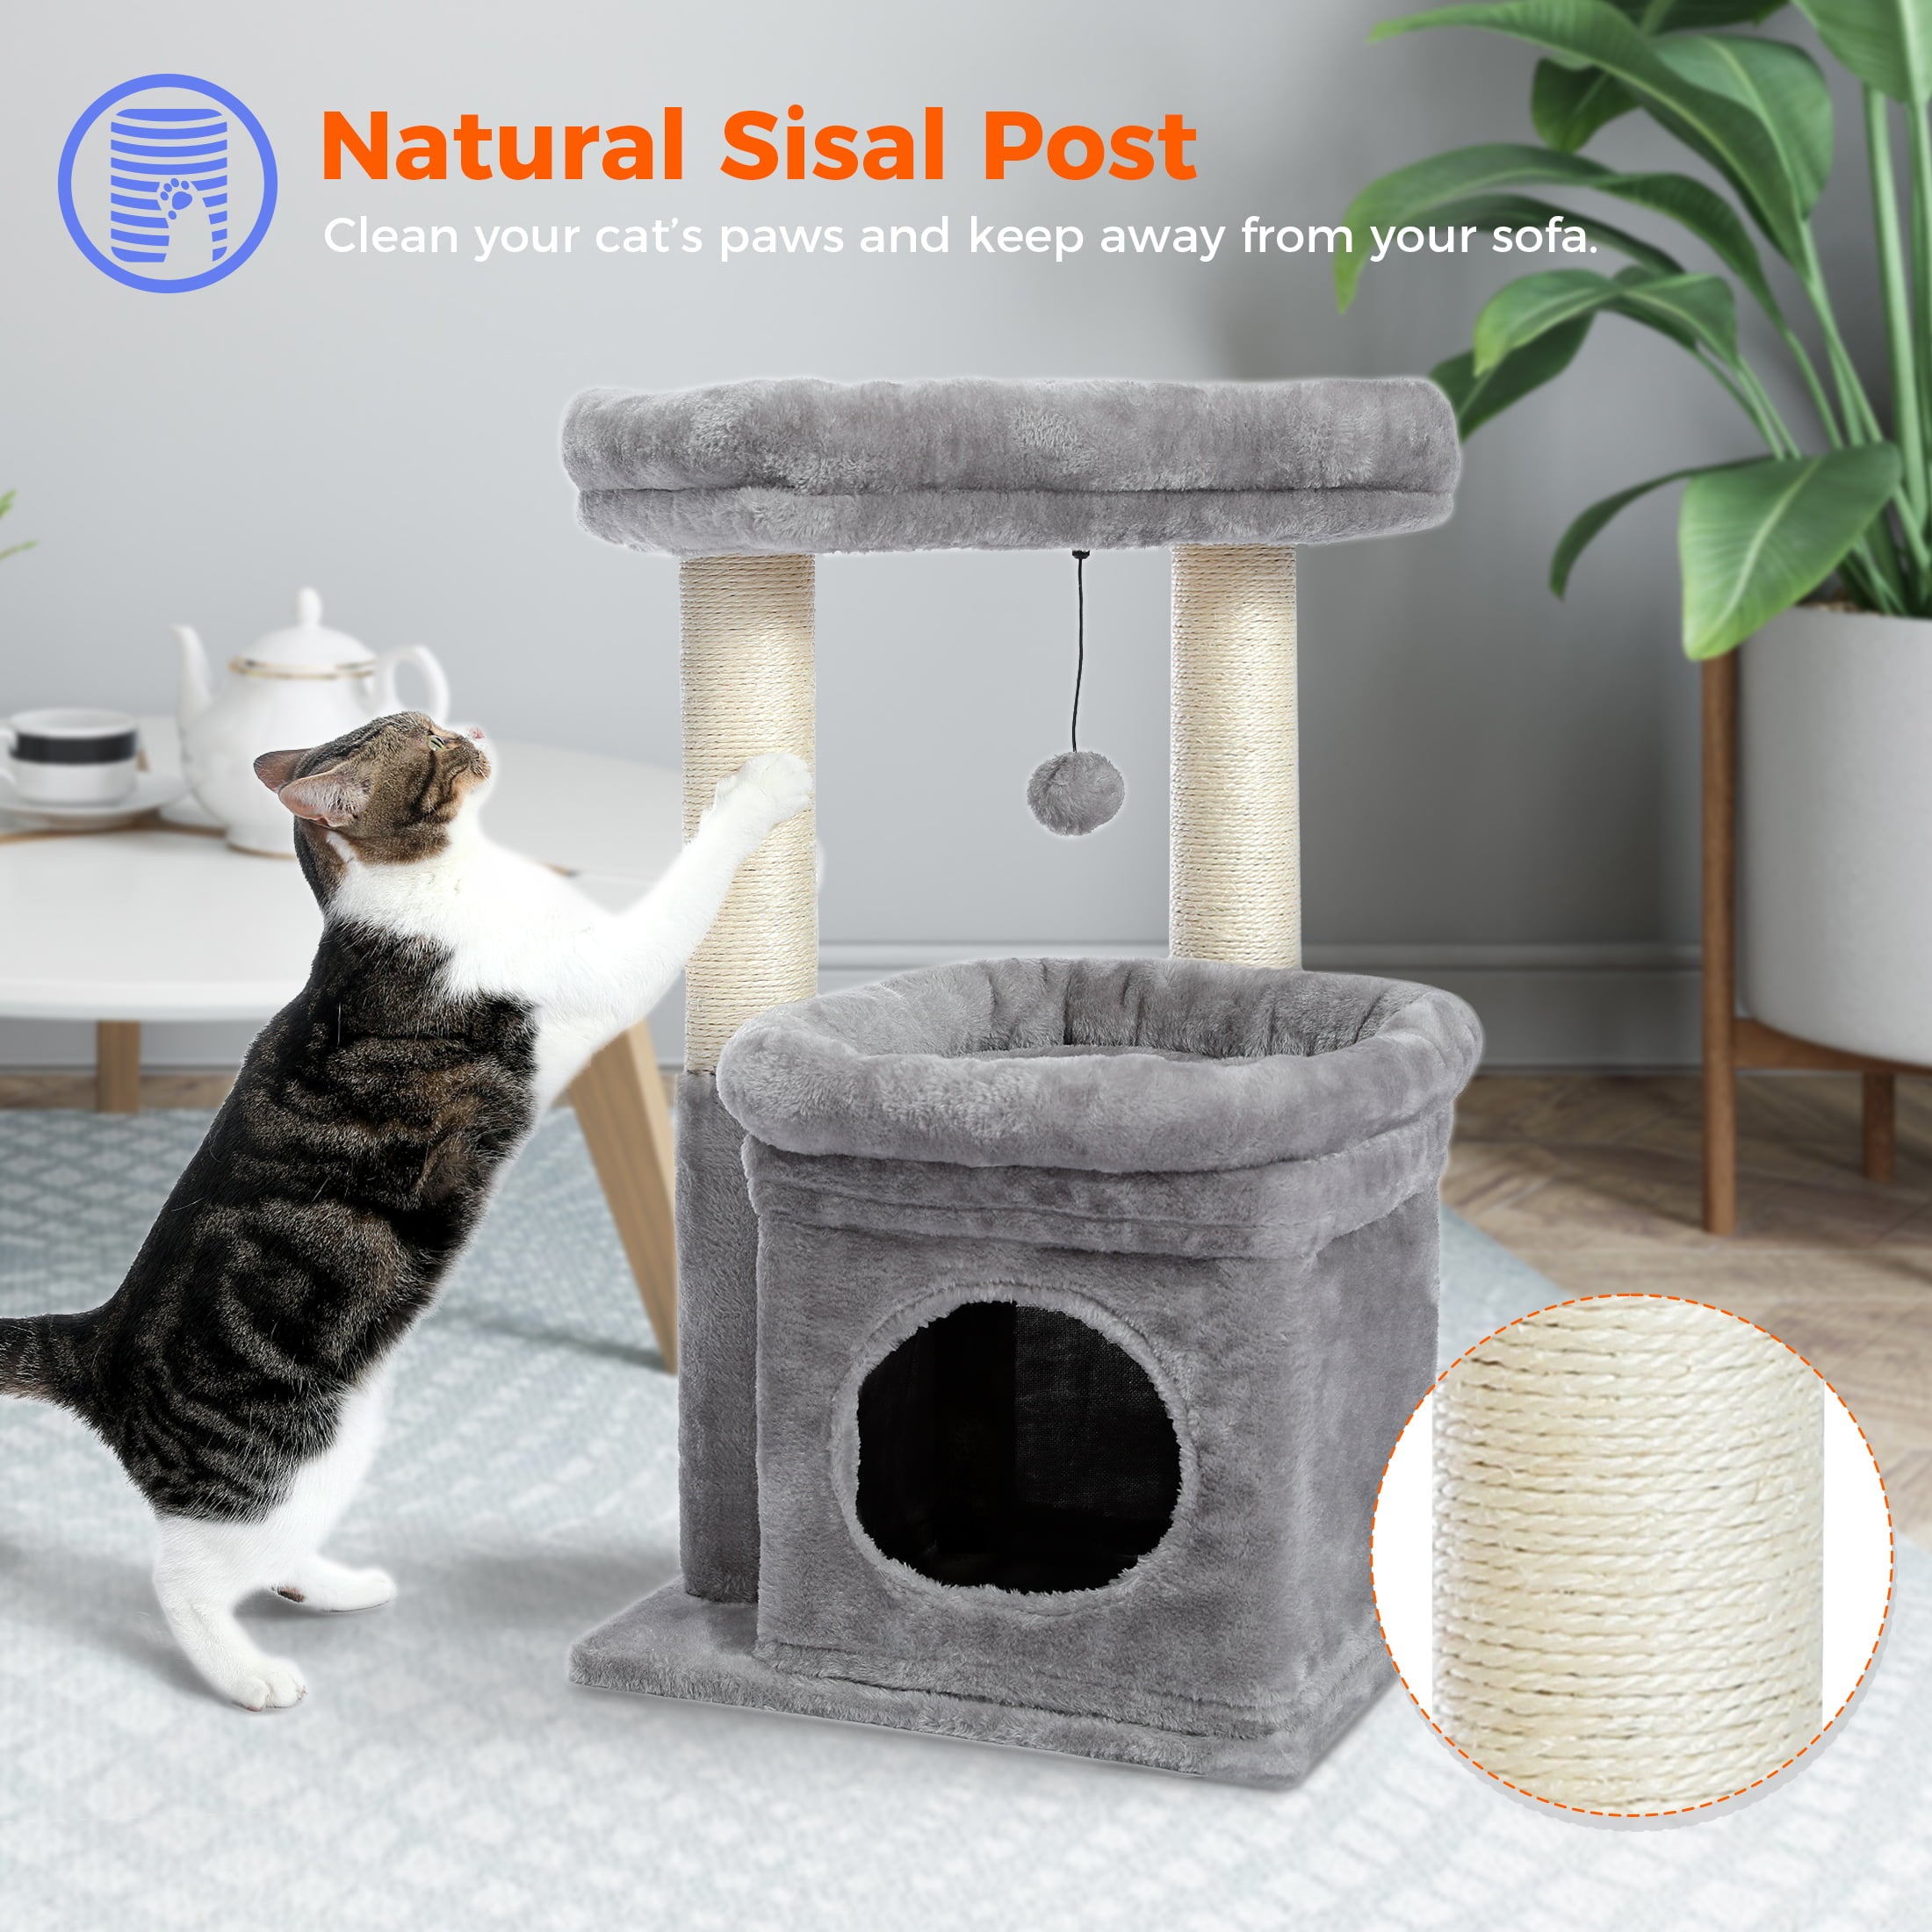 PAWZ Road Small Cat Tree Tower Plush Condo and Scratching Posts for Kittens Medium Cats， Gray